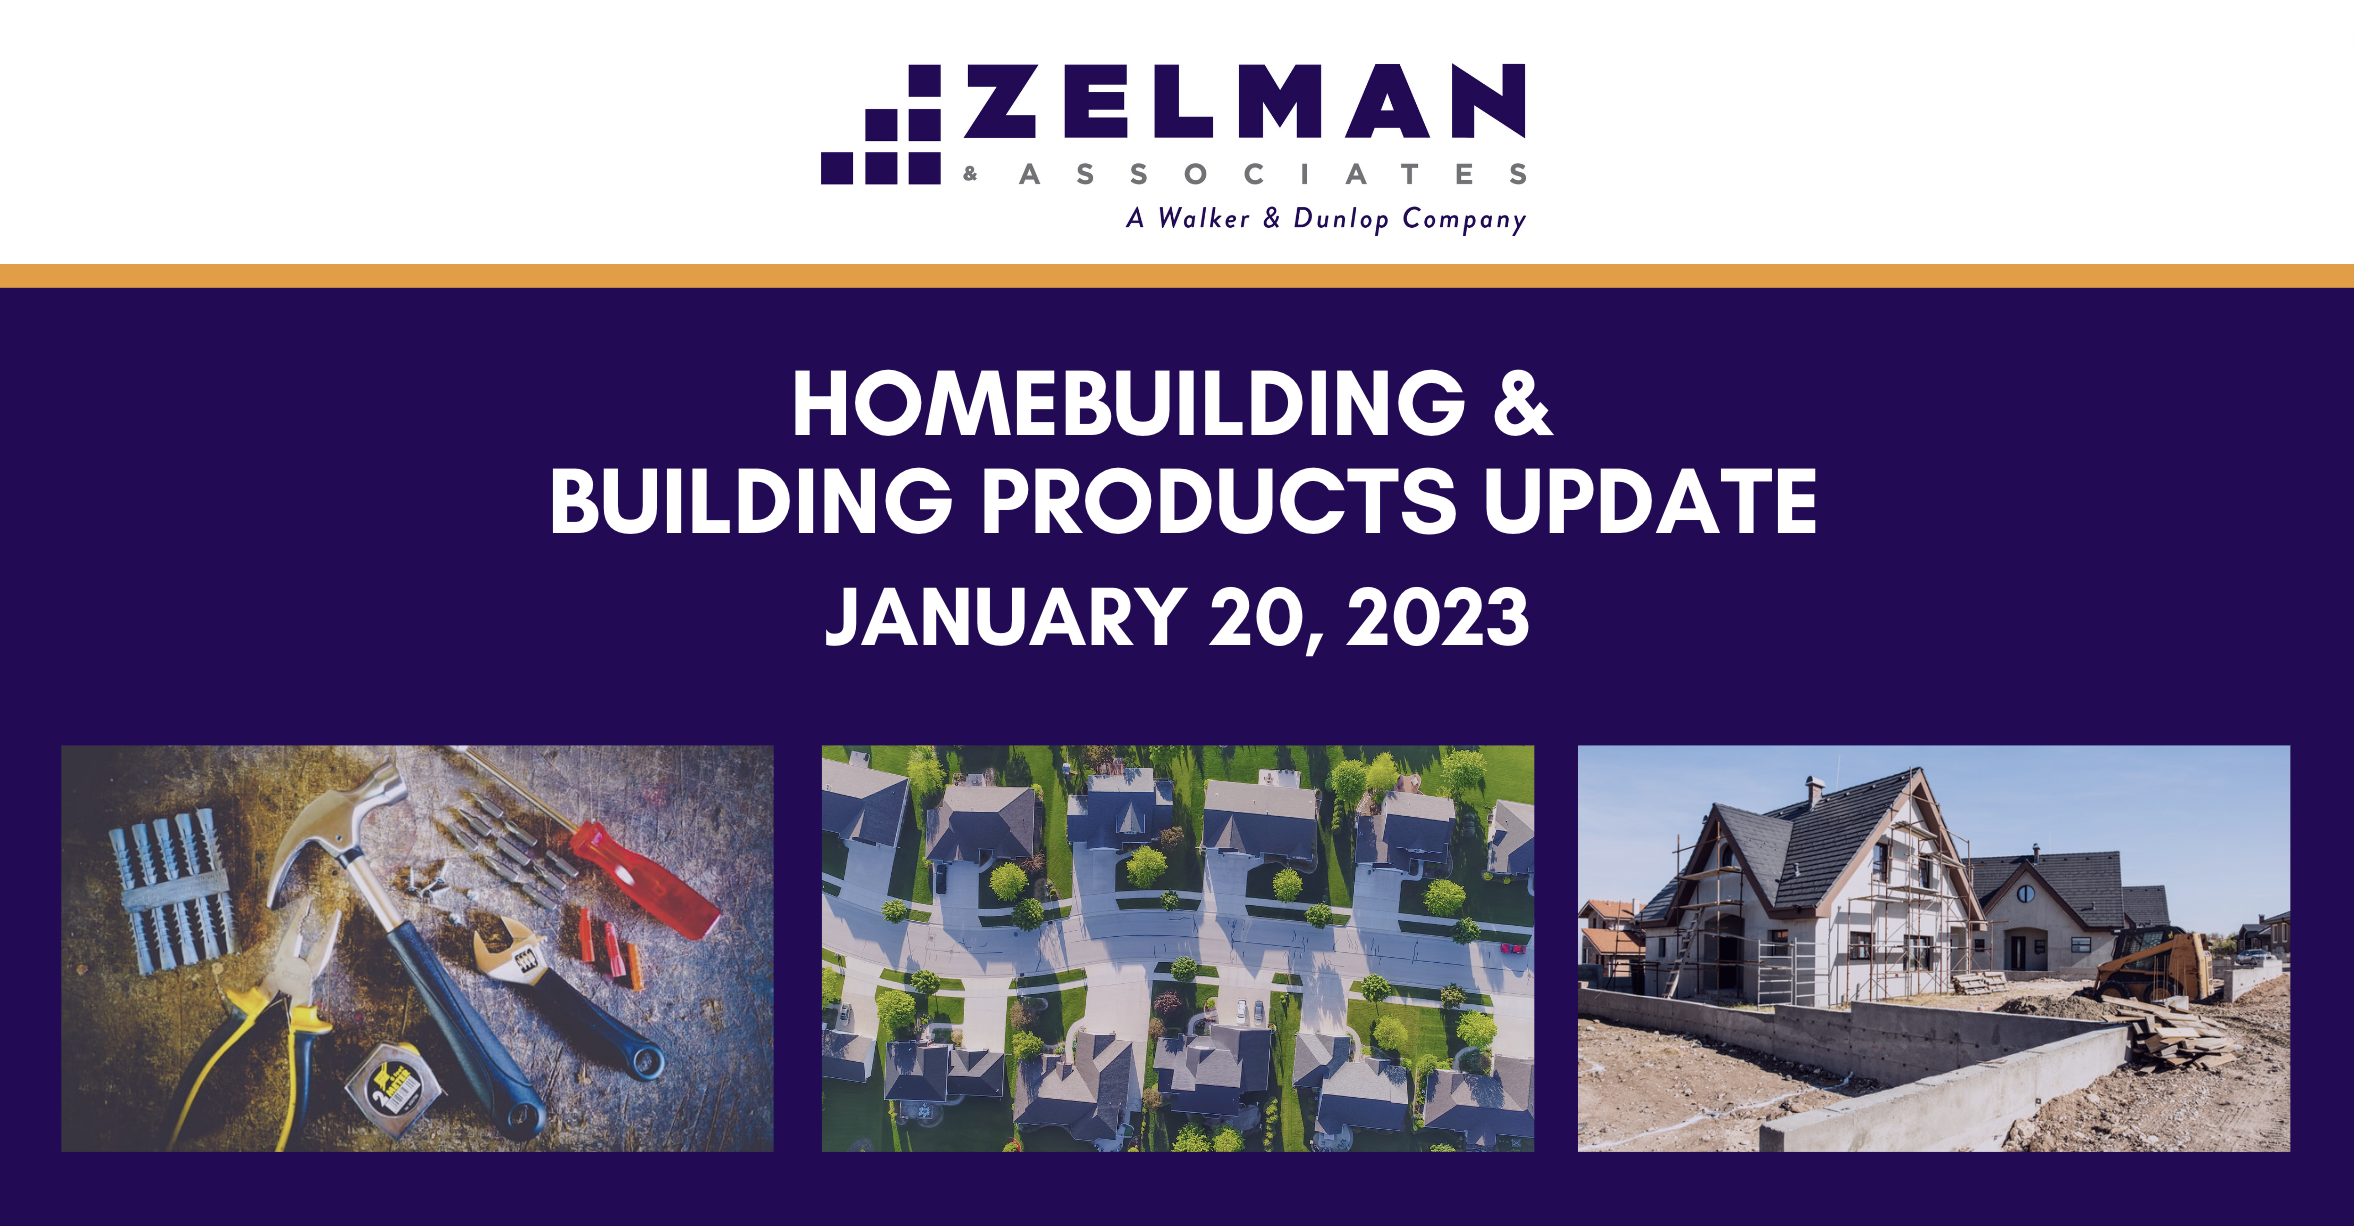 Homebuilding & Building Products Update